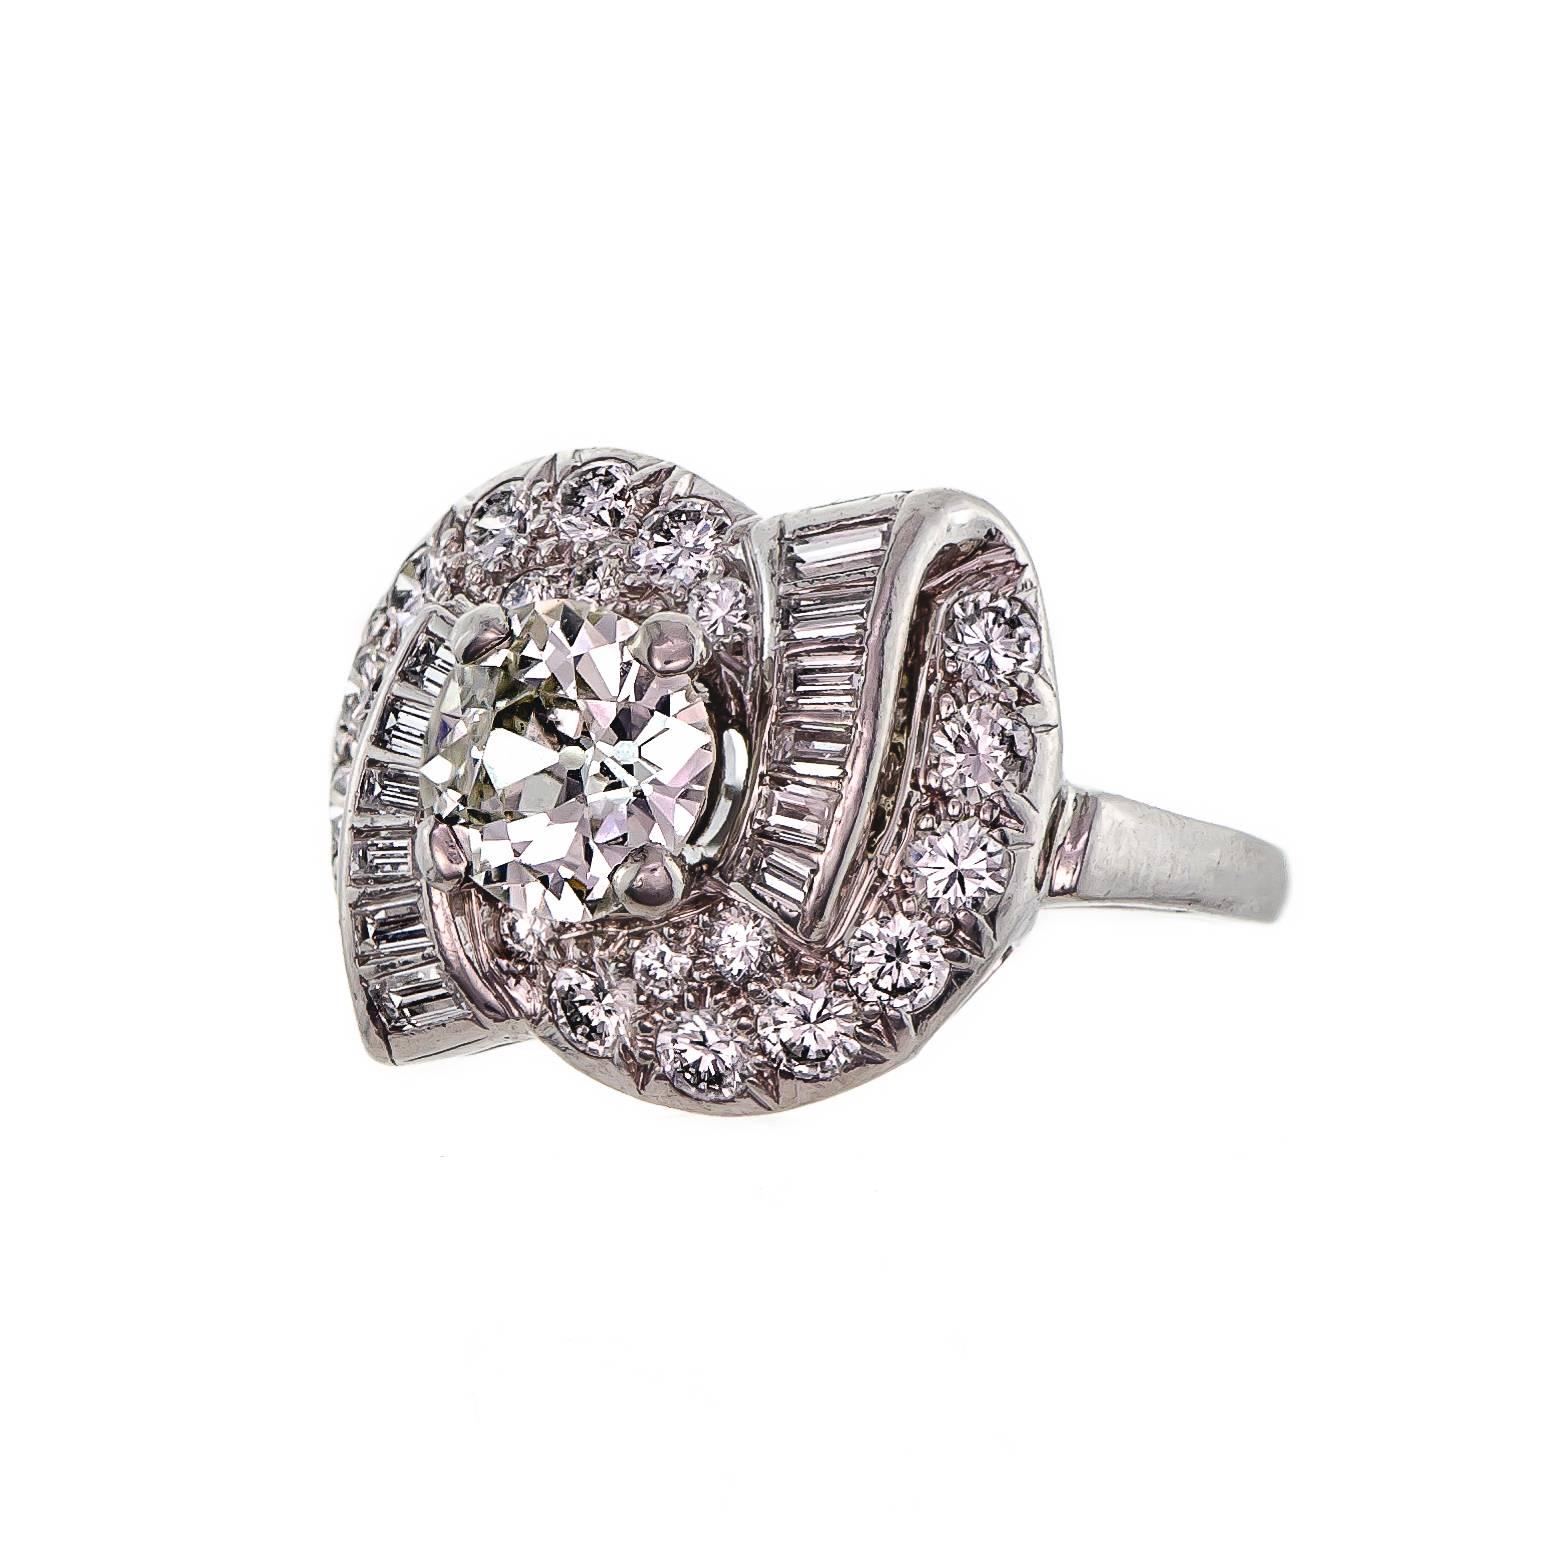 Beautiful vintage circa 1930s platinum and diamond cocktail ring set with one Old European Cut diamond measuring appxoimately 6.7 -6.85 X 3.47 mm approx weight 1.01 cts  SI1-2 clarity, J-K color four prong set into a platinum ring mount inside shank